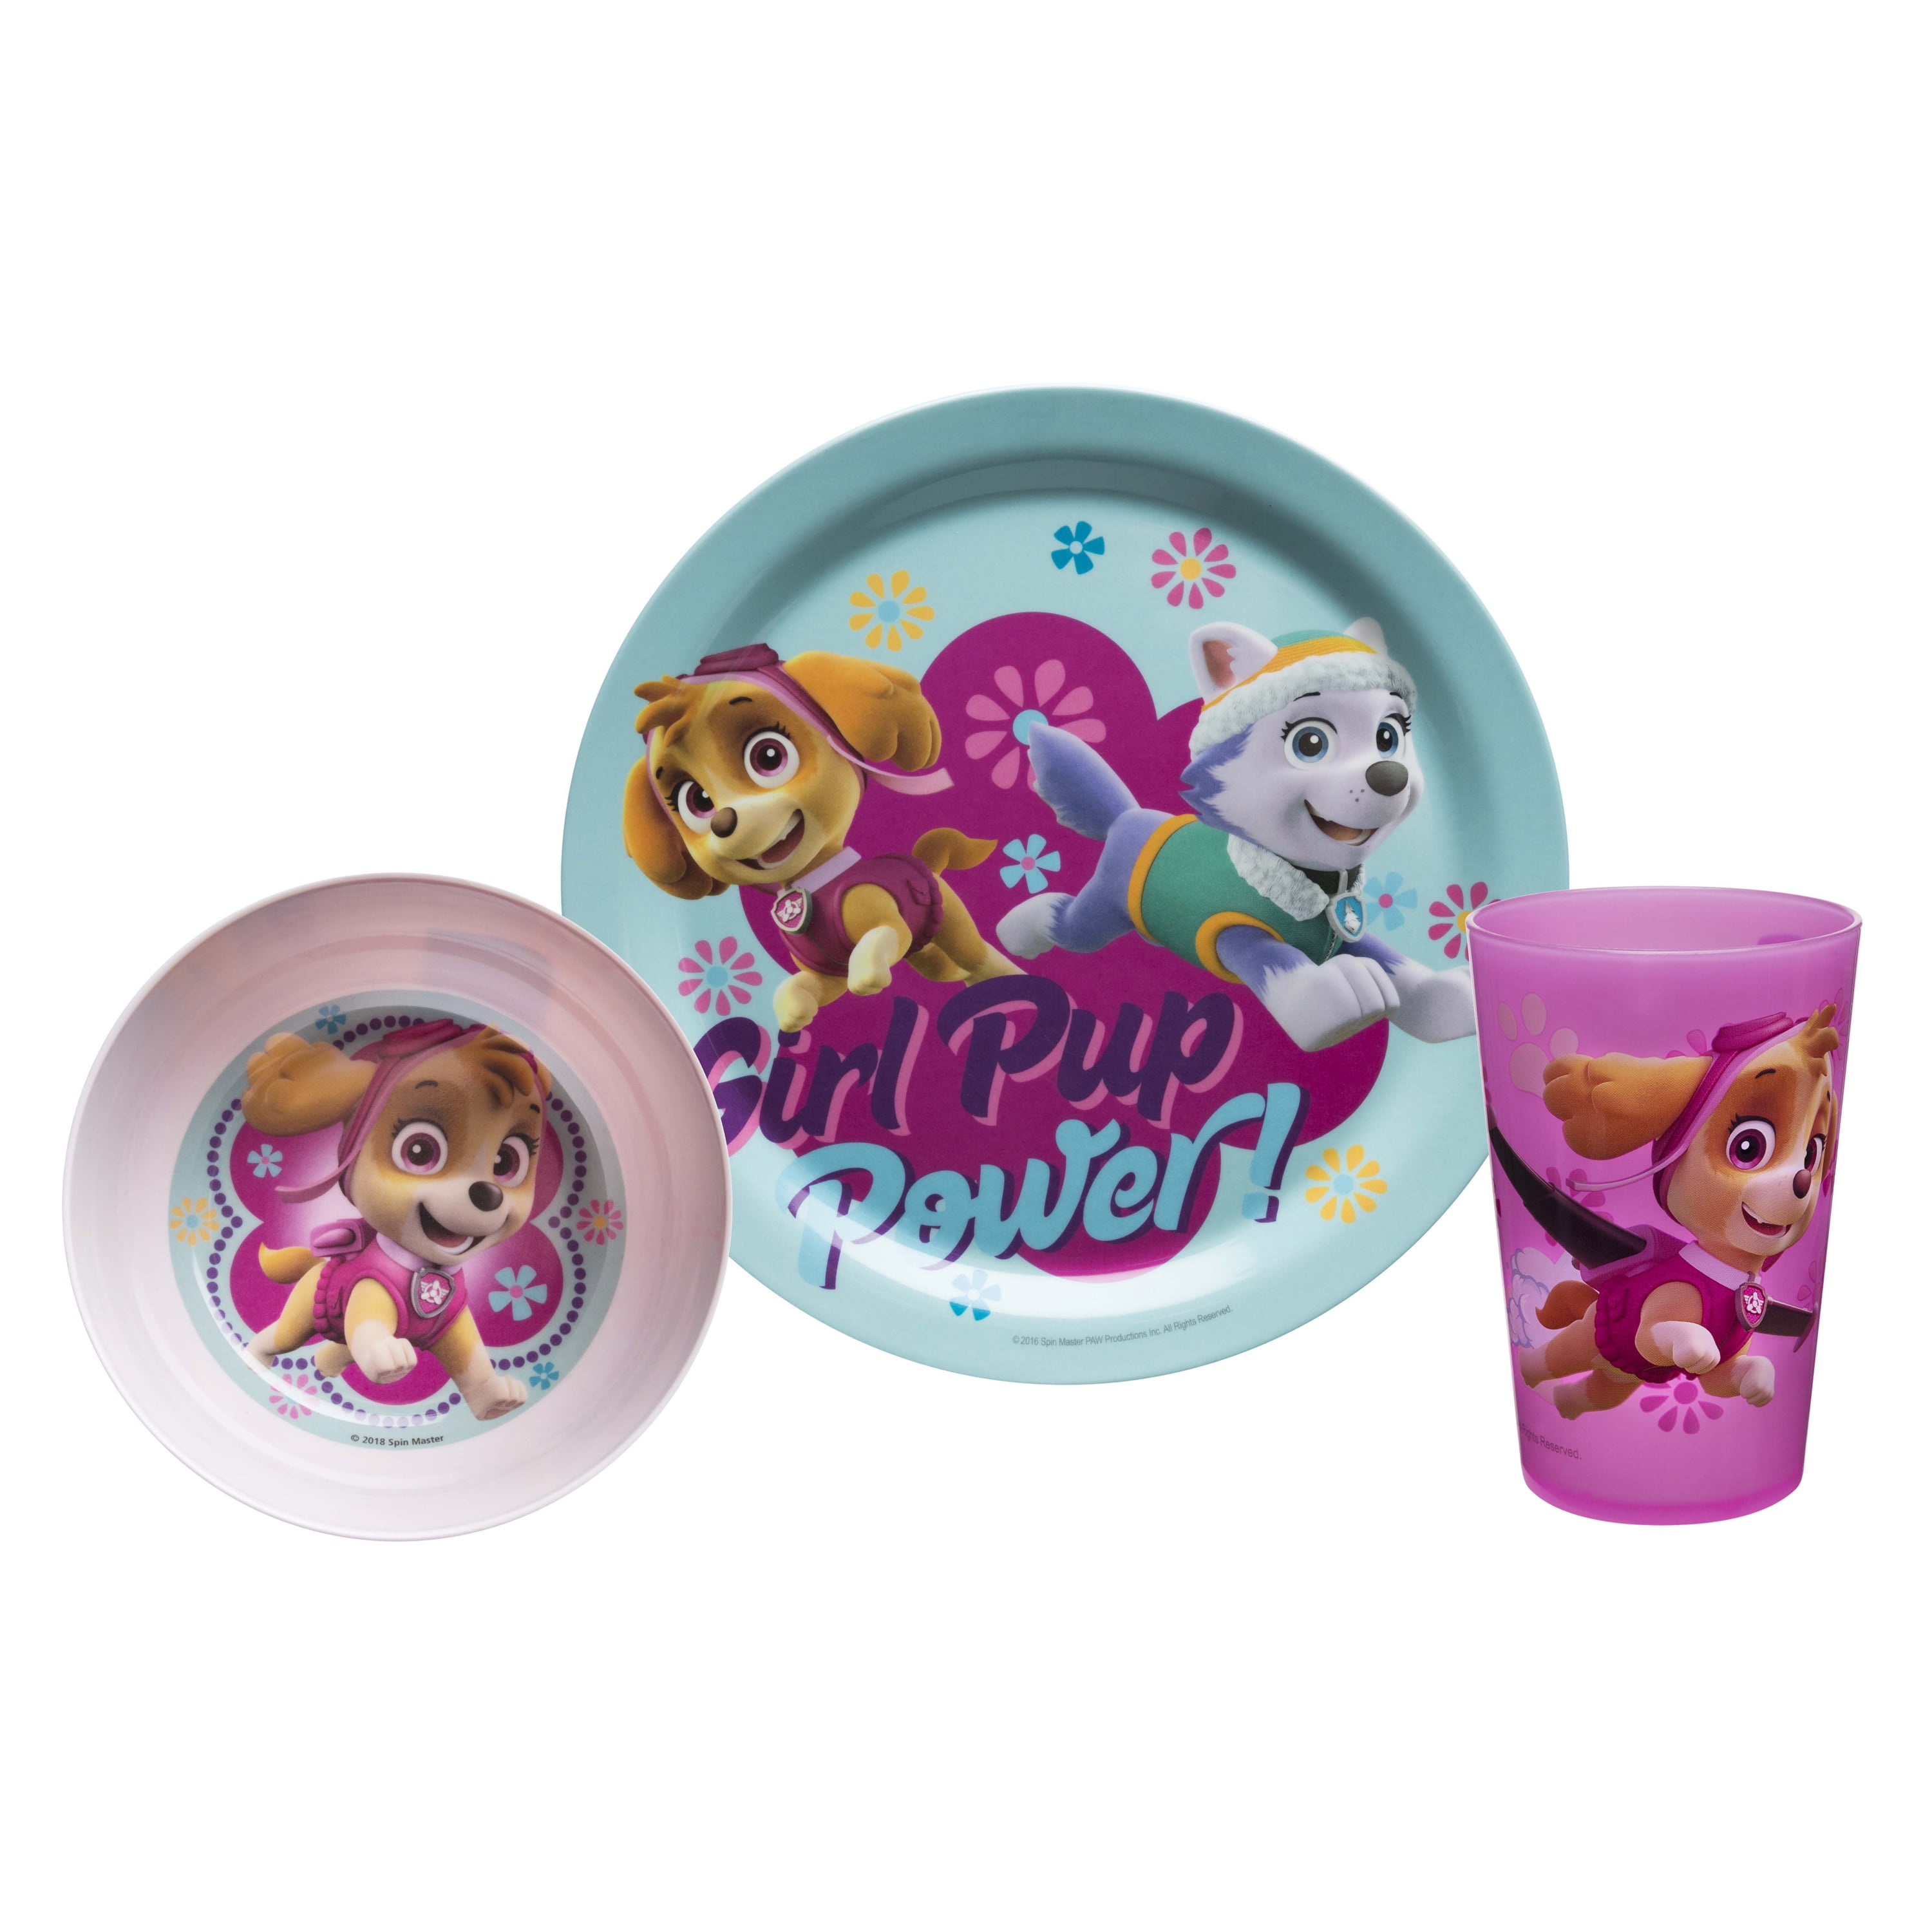 5pc Bowl Tumbler and Utensil Tableware BPA-Free Made of Durable Melamine Material and Perfect for Kids Zak Designs Paw Patrol Dinnerware Set Includes Plate 